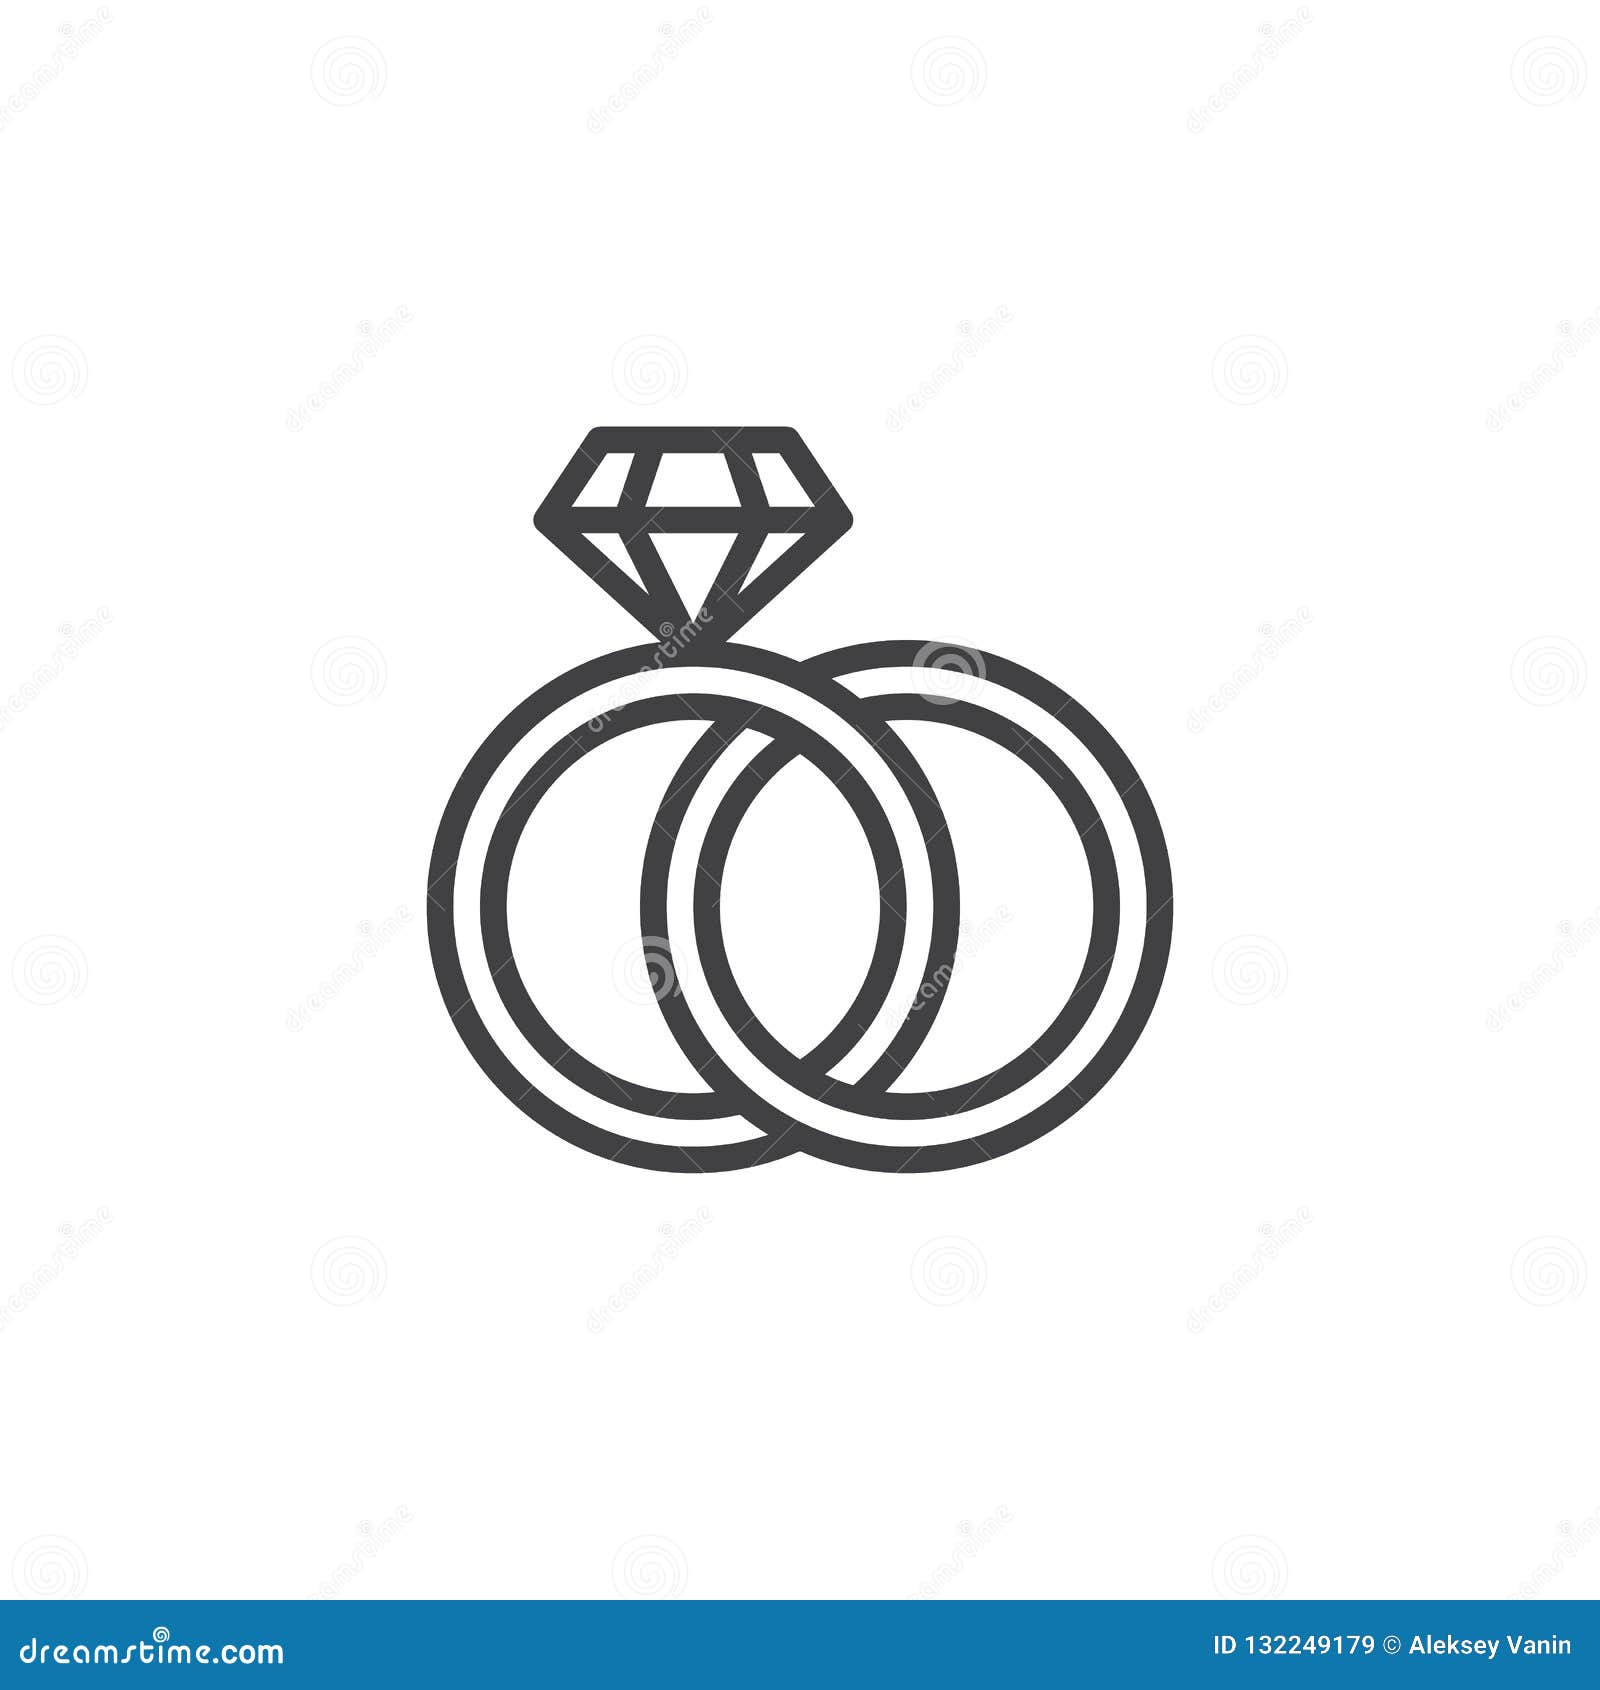 Engagement Rings Outline Icon Stock Vector - Illustration of accessory ...